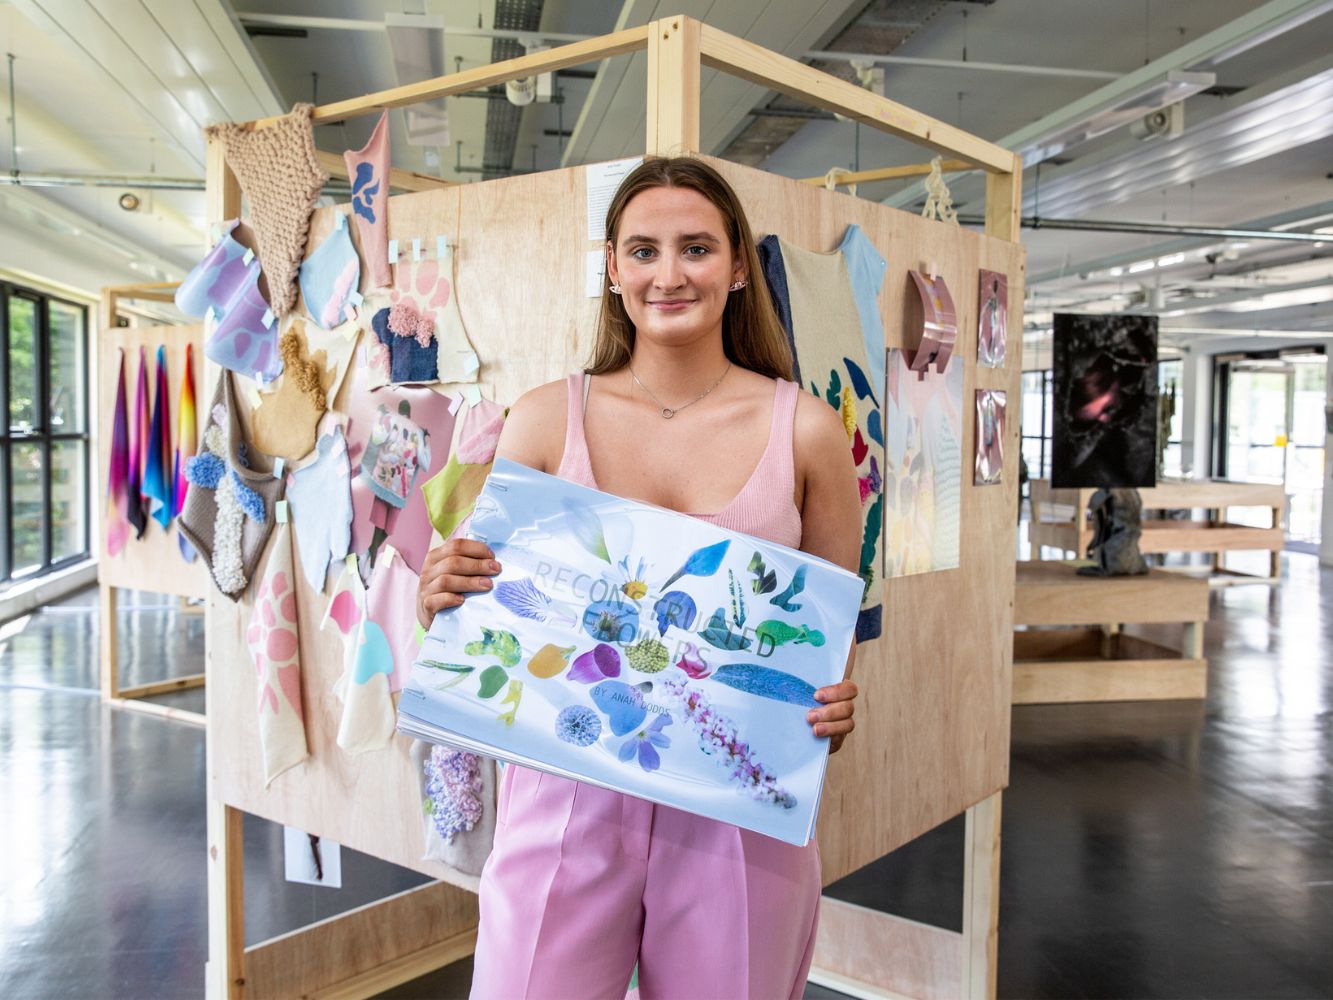 Anah Dodds poses with artwork